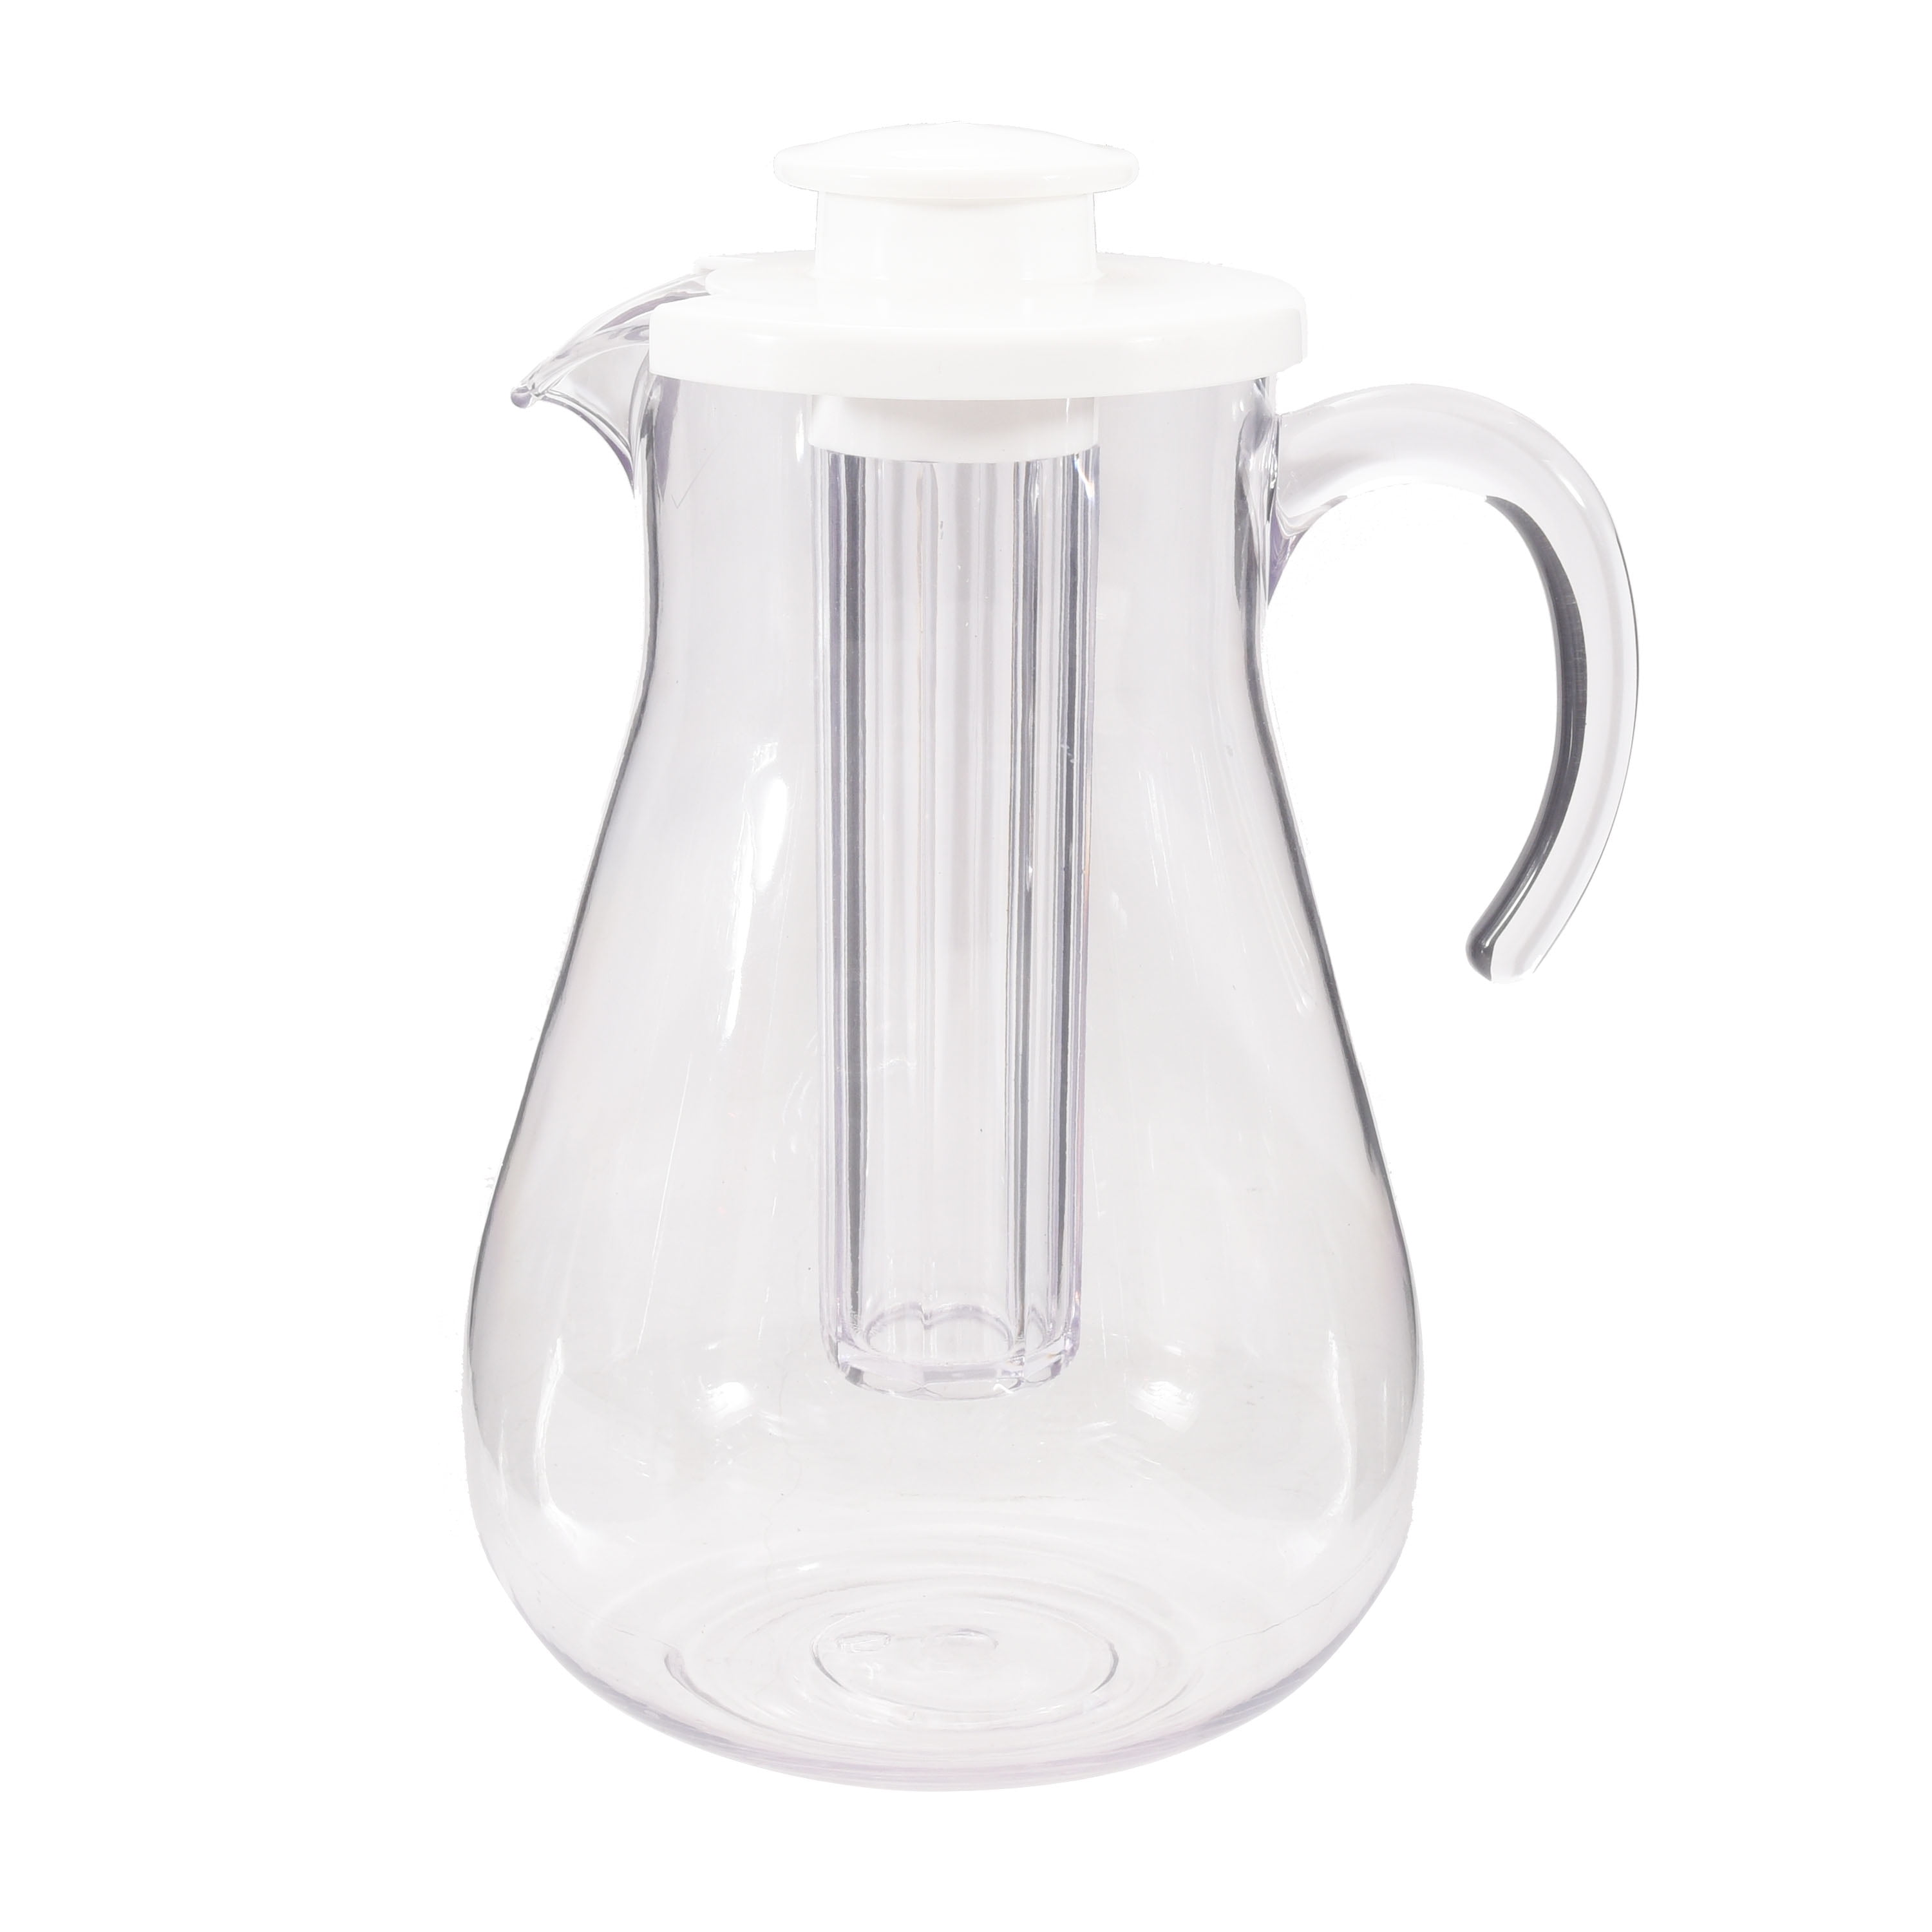  Tribello 3 Liter Water Pitcher, Plastic Juice Pitcher With Lid  - MEDIUM - Colors May Vary (3 Liter) : Home & Kitchen